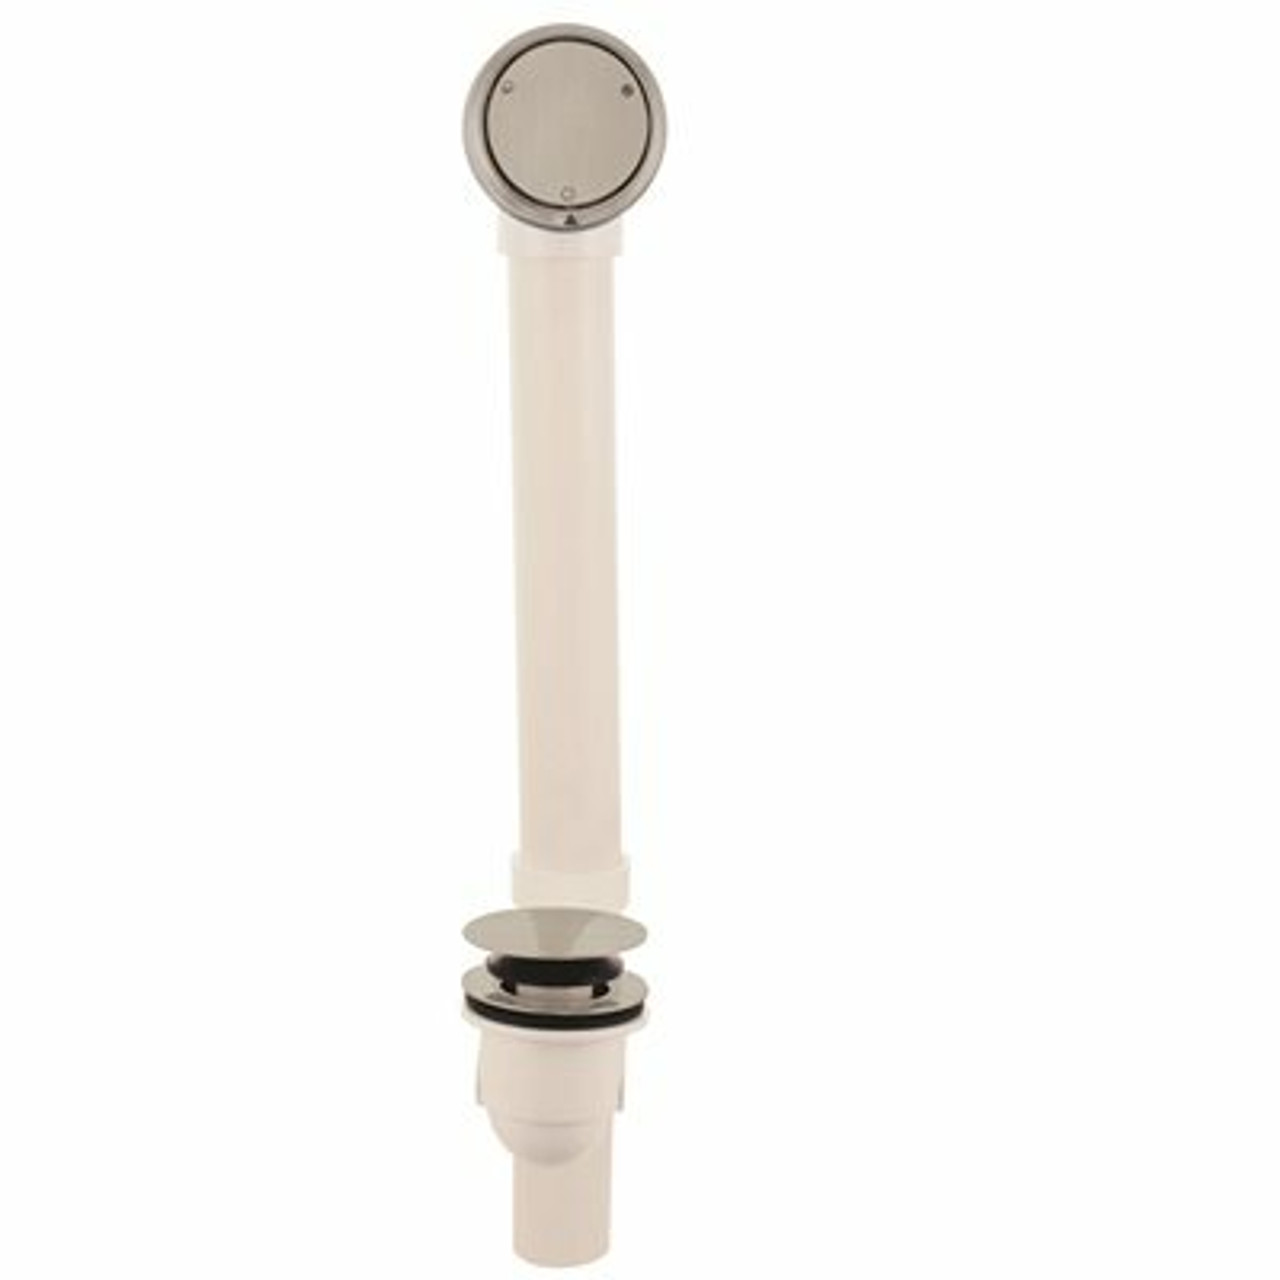 Westbrass Sch. 40 Pvc Tub Waste With Tip-Toe Drain And Closing Overflow, Satin Nickel